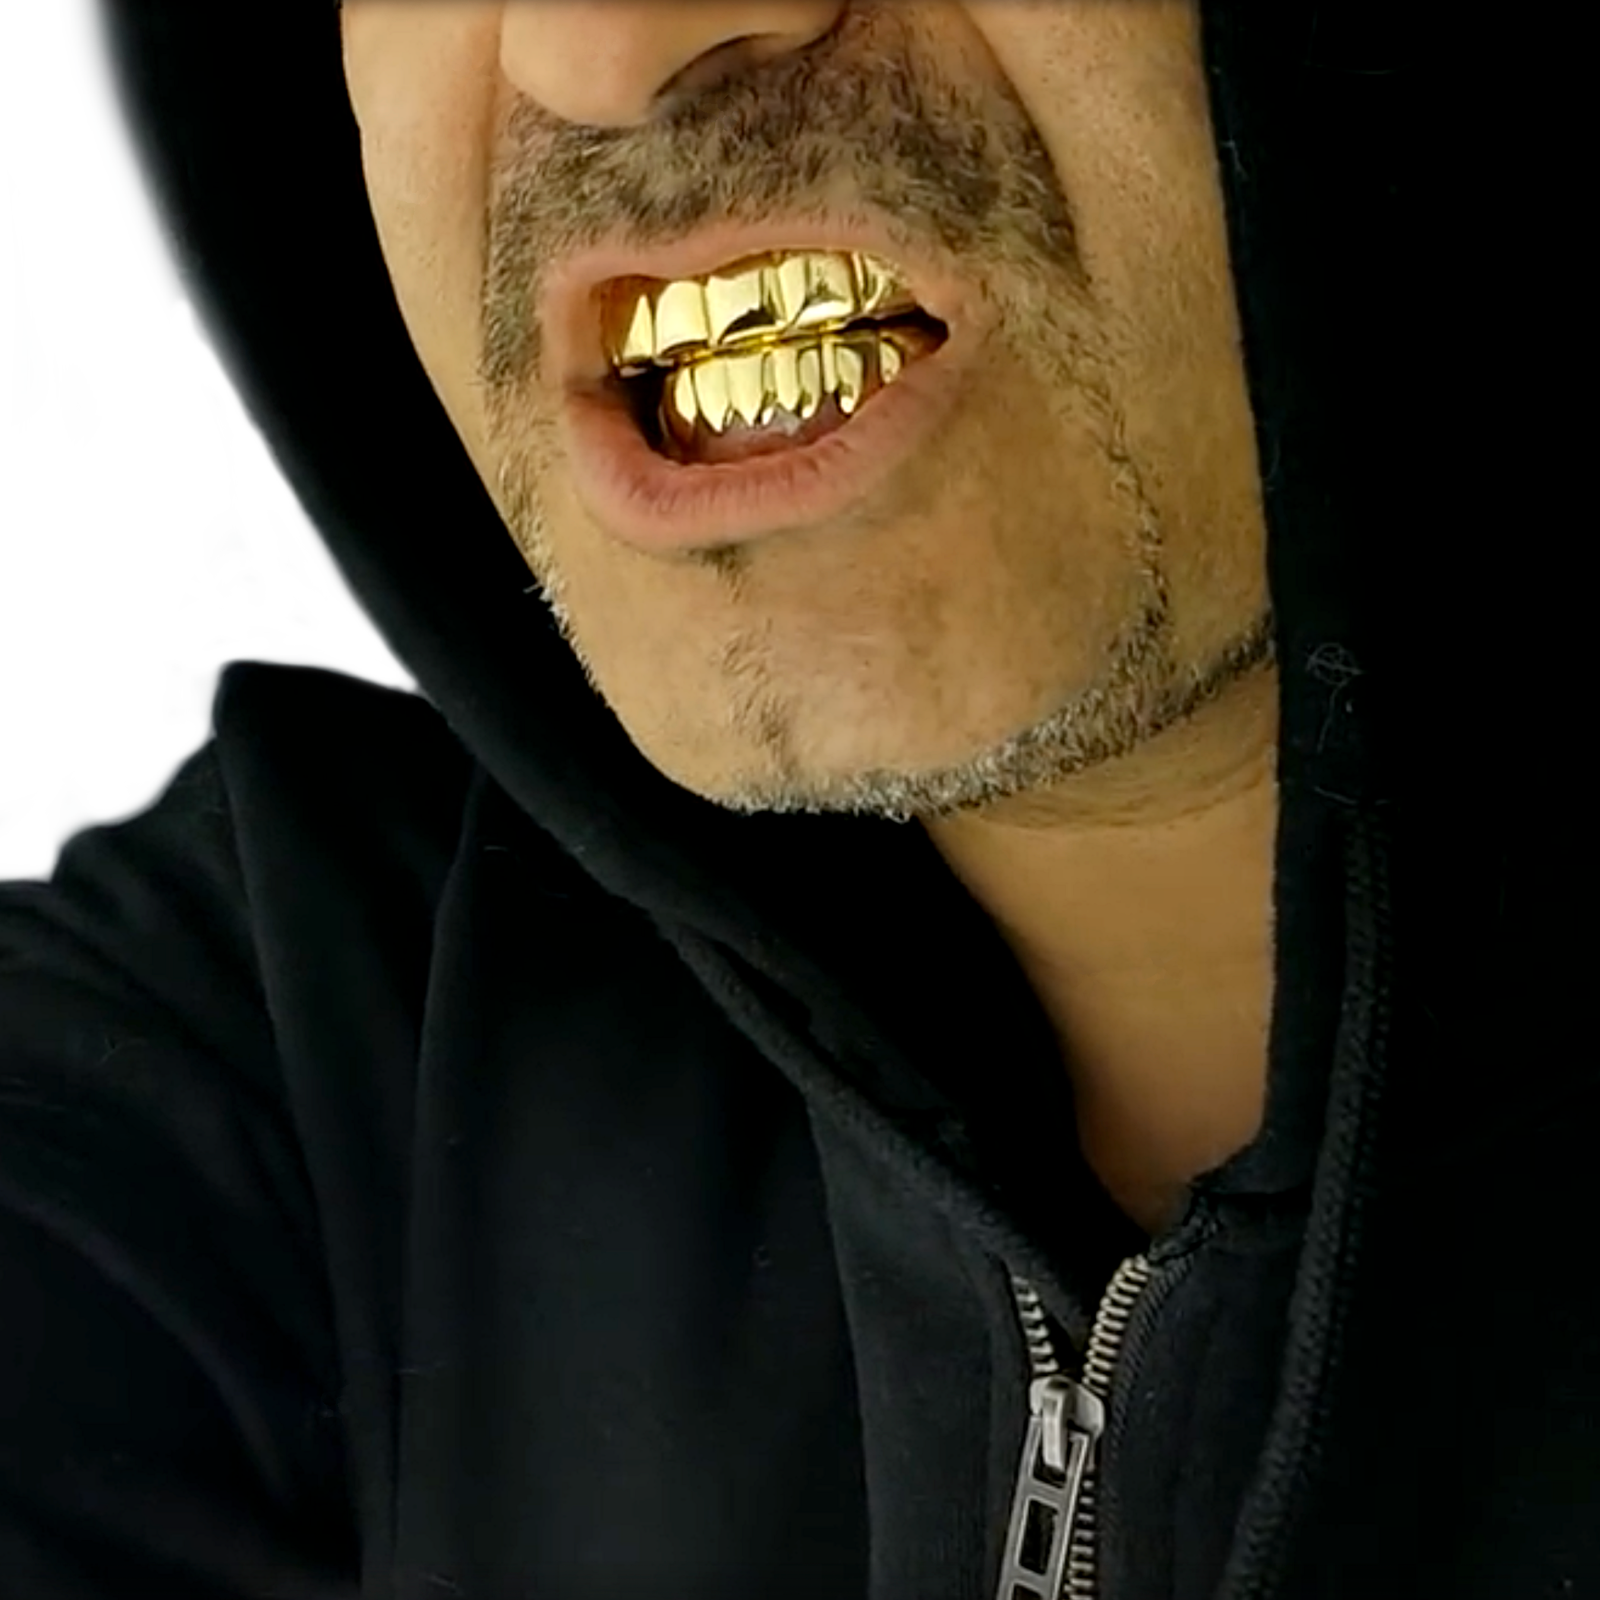 Gold tooth vs Grills 